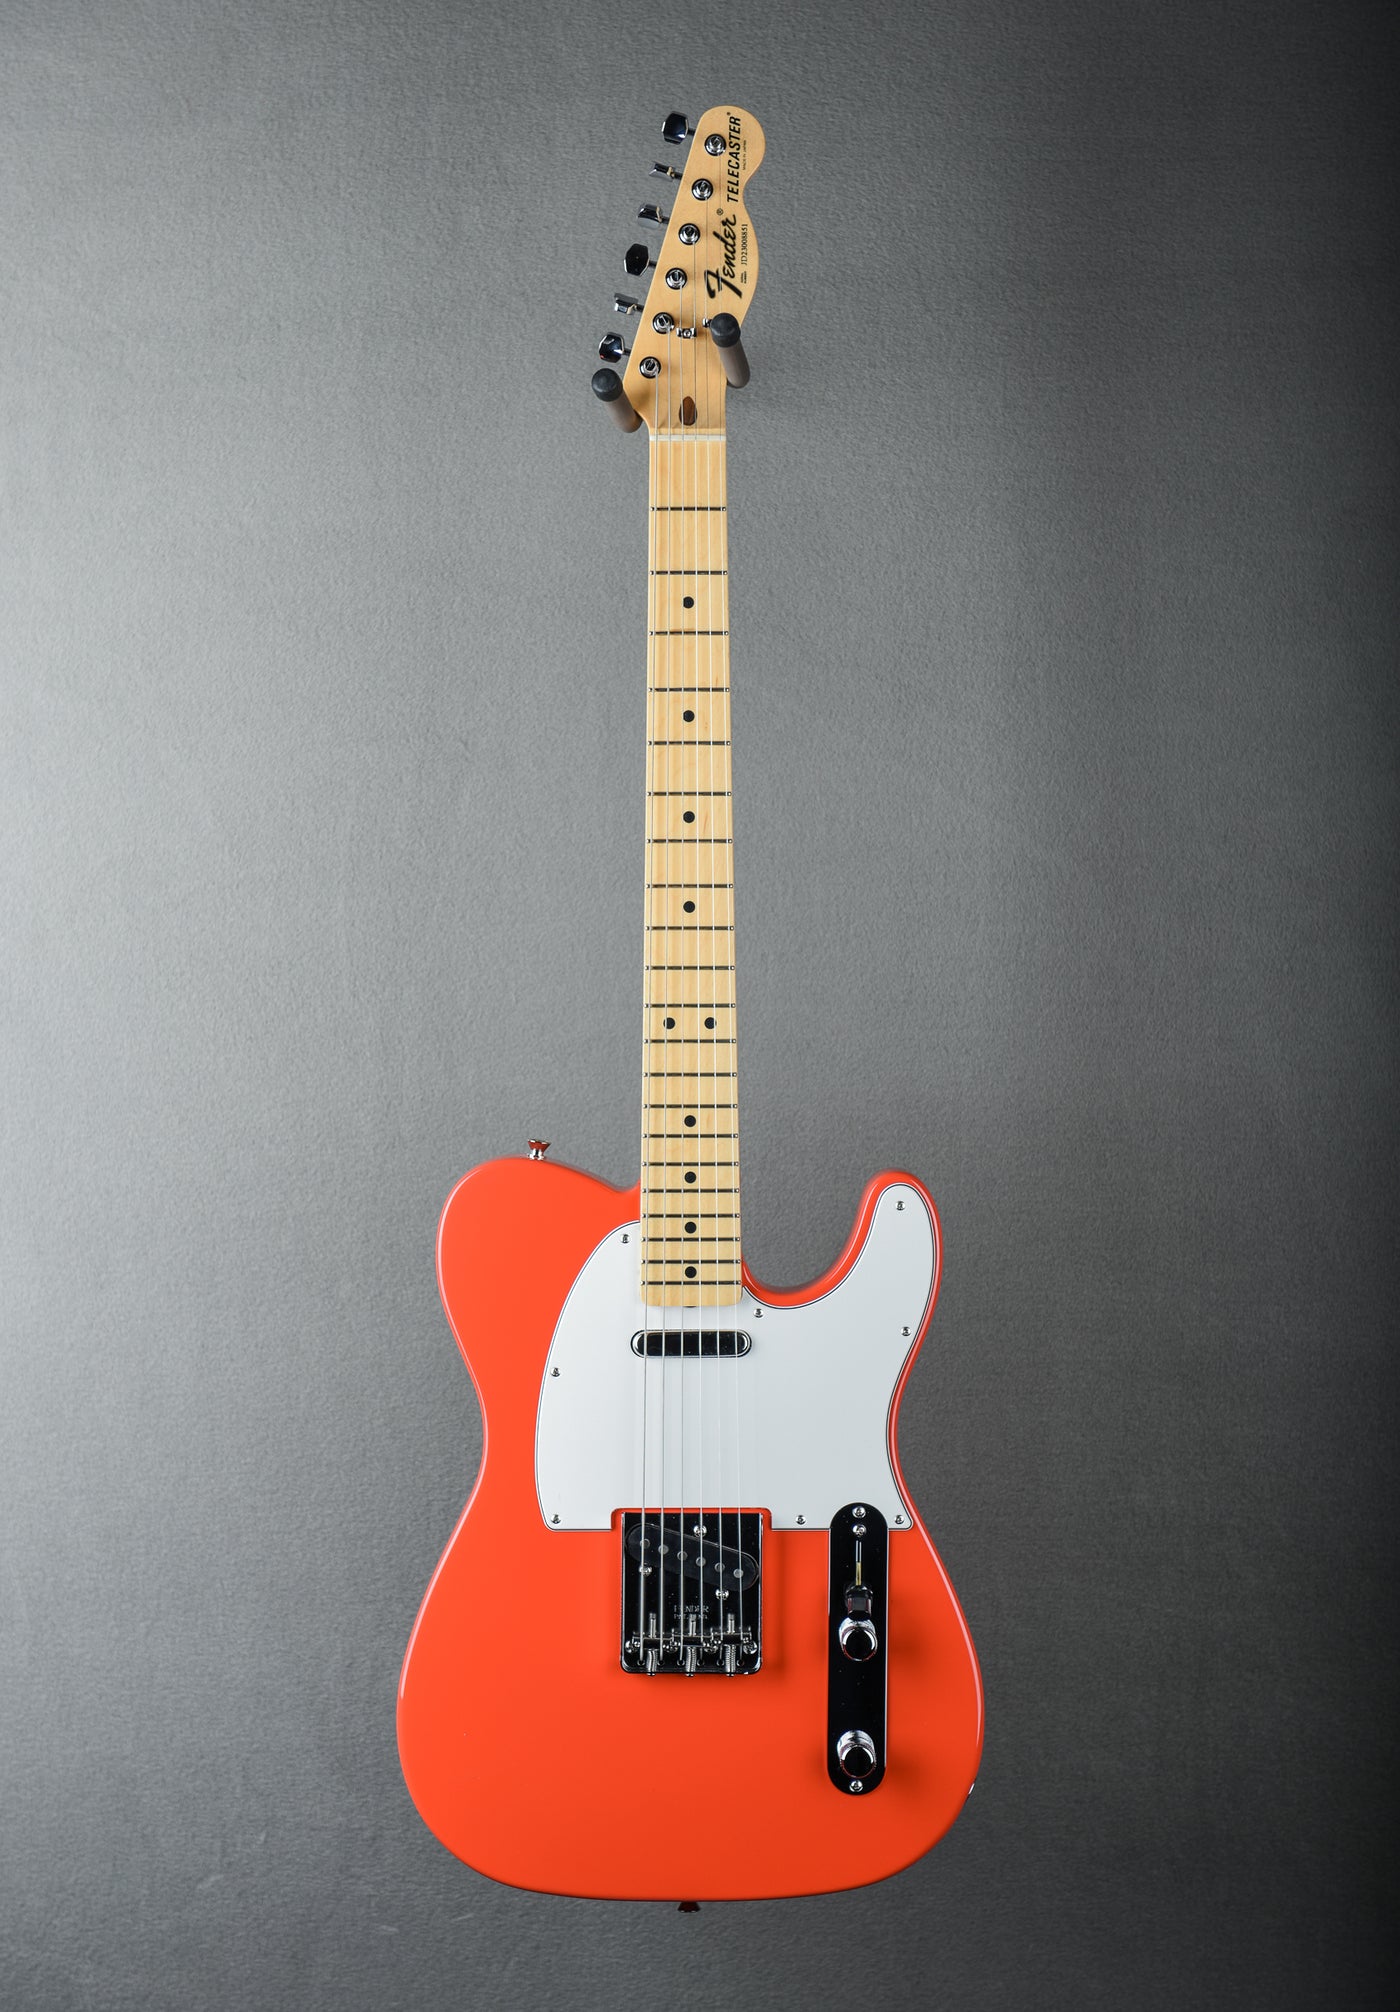 MIJ Limited International Color Telecaster - Morocco Red